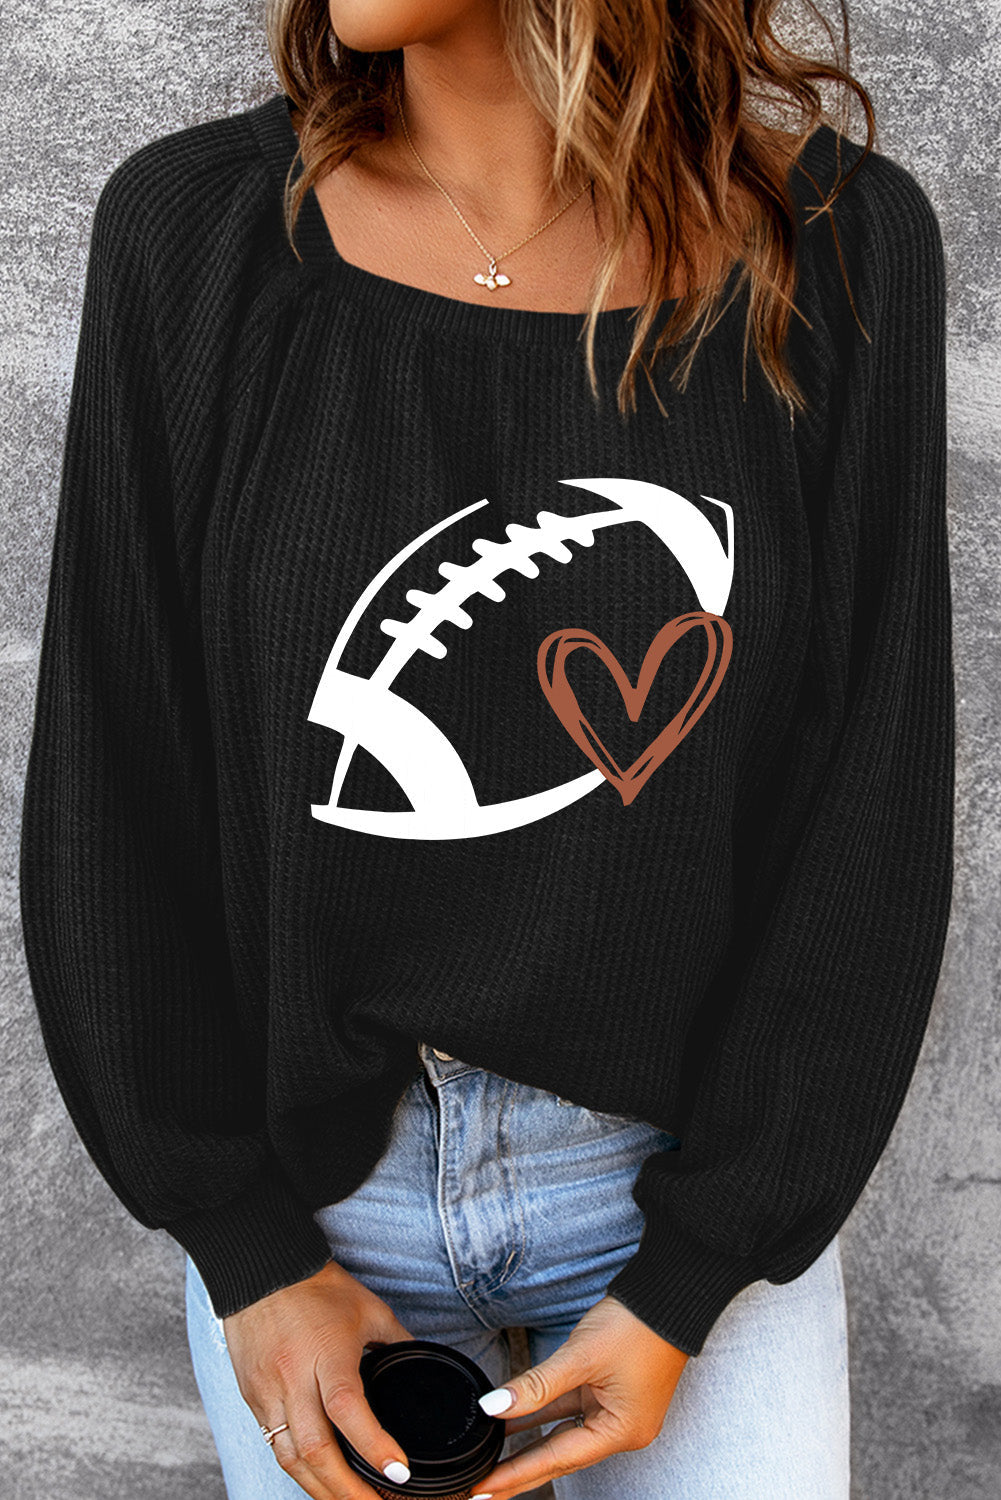 Football Graphic Ribbed Top - Women’s Clothing & Accessories - Shirts & Tops - 3 - 2024